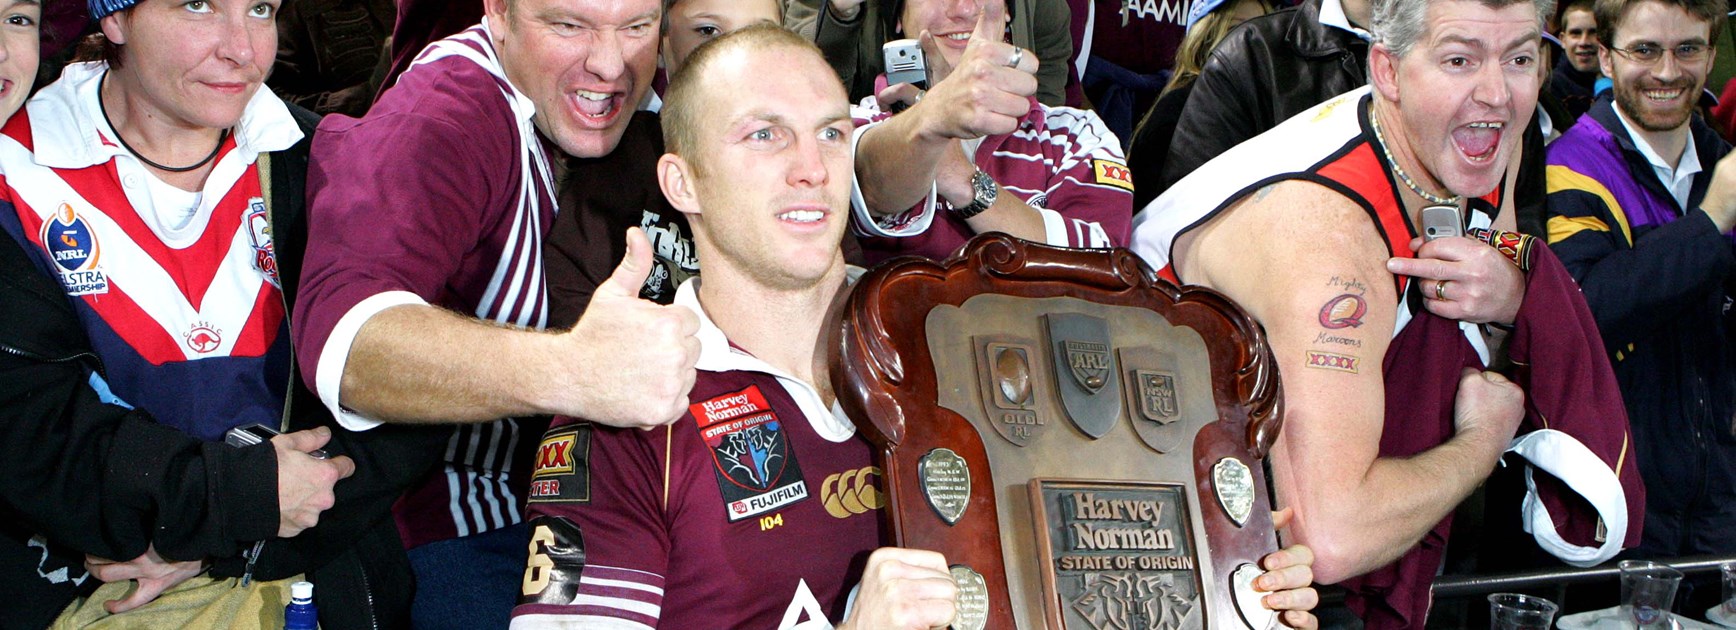 November 20: Lockyer's Golden double; Rise of the Wolfman